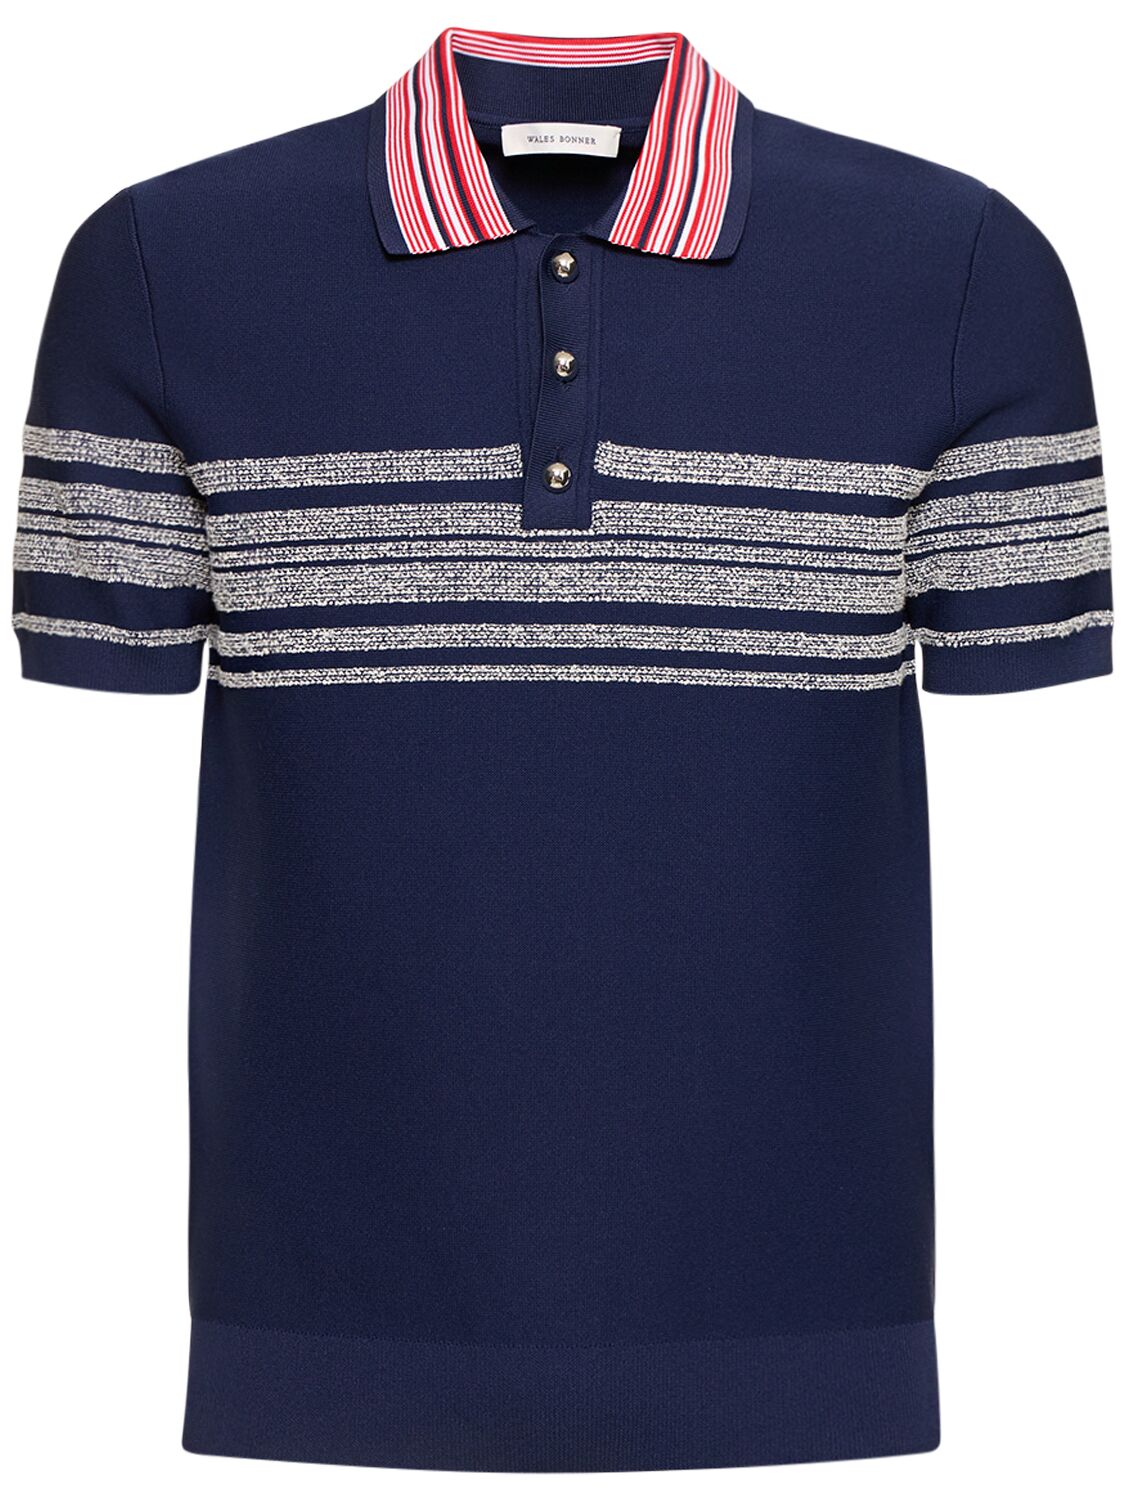 Wales Bonner Striped Tech Blend Polo In Navy,red